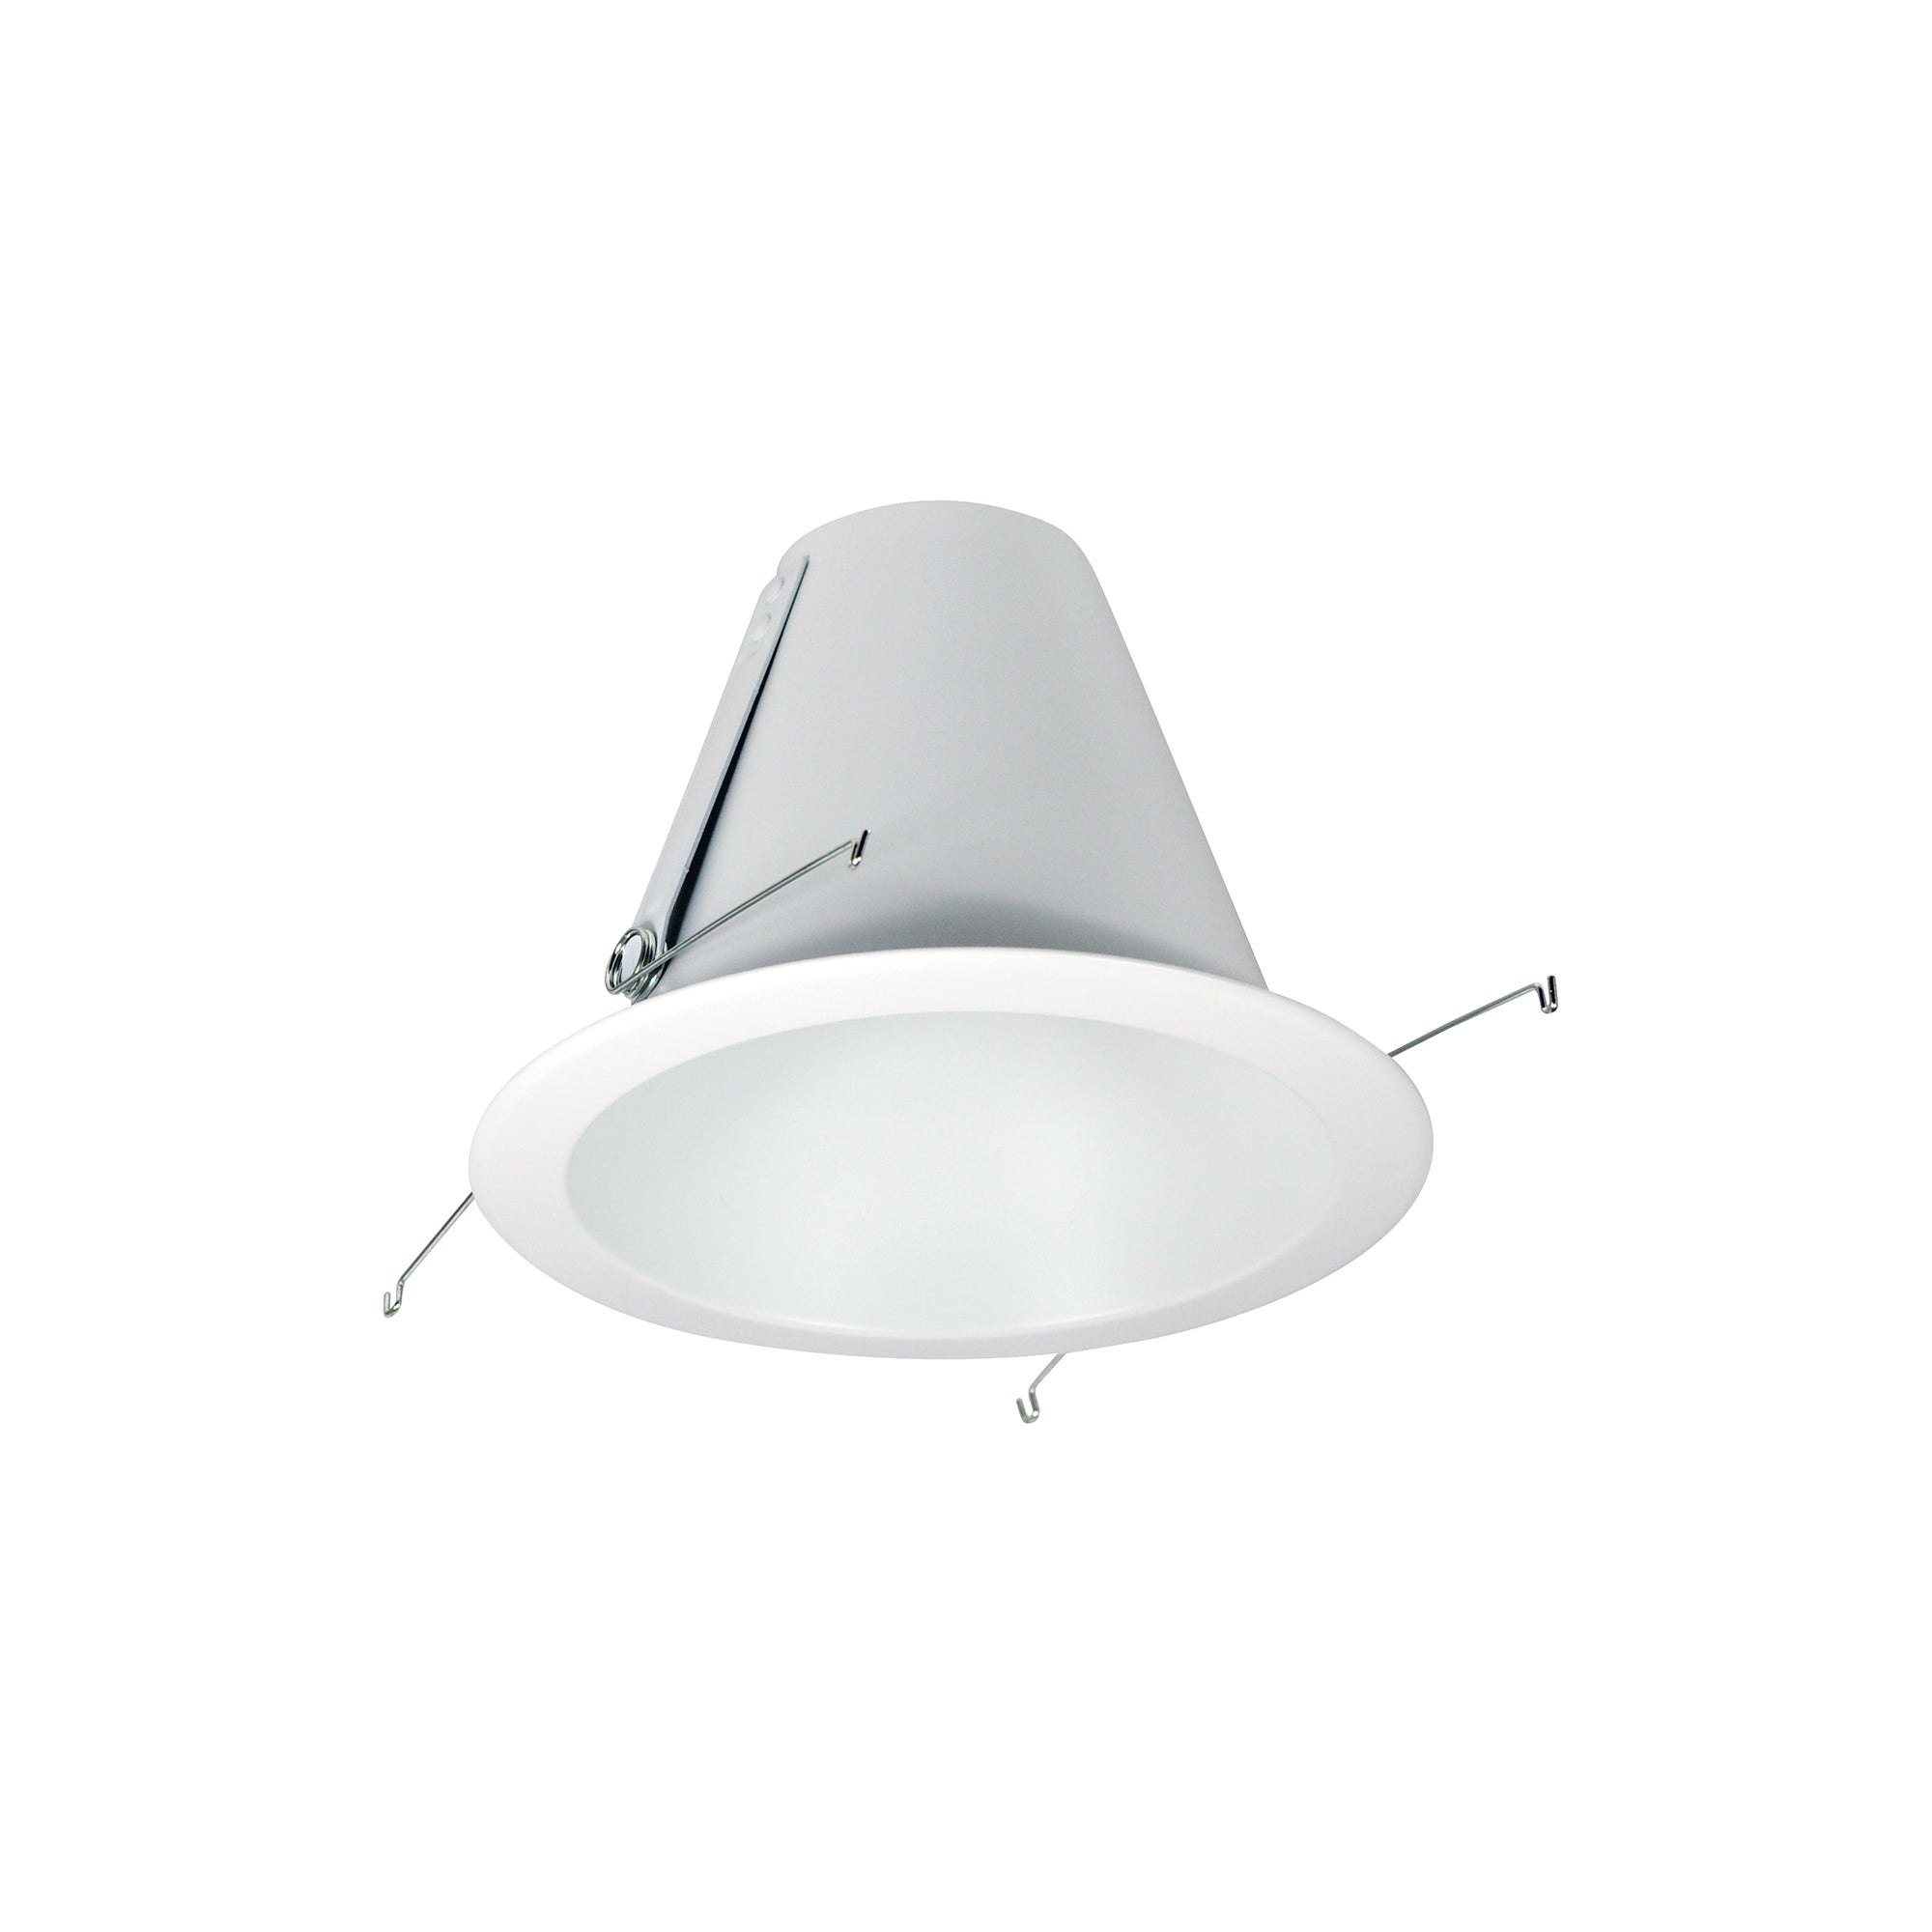 Nora Lighting NTM-710WAL - Recessed - 6 Inch Air-Tight Aluminum Cone Reflector, White